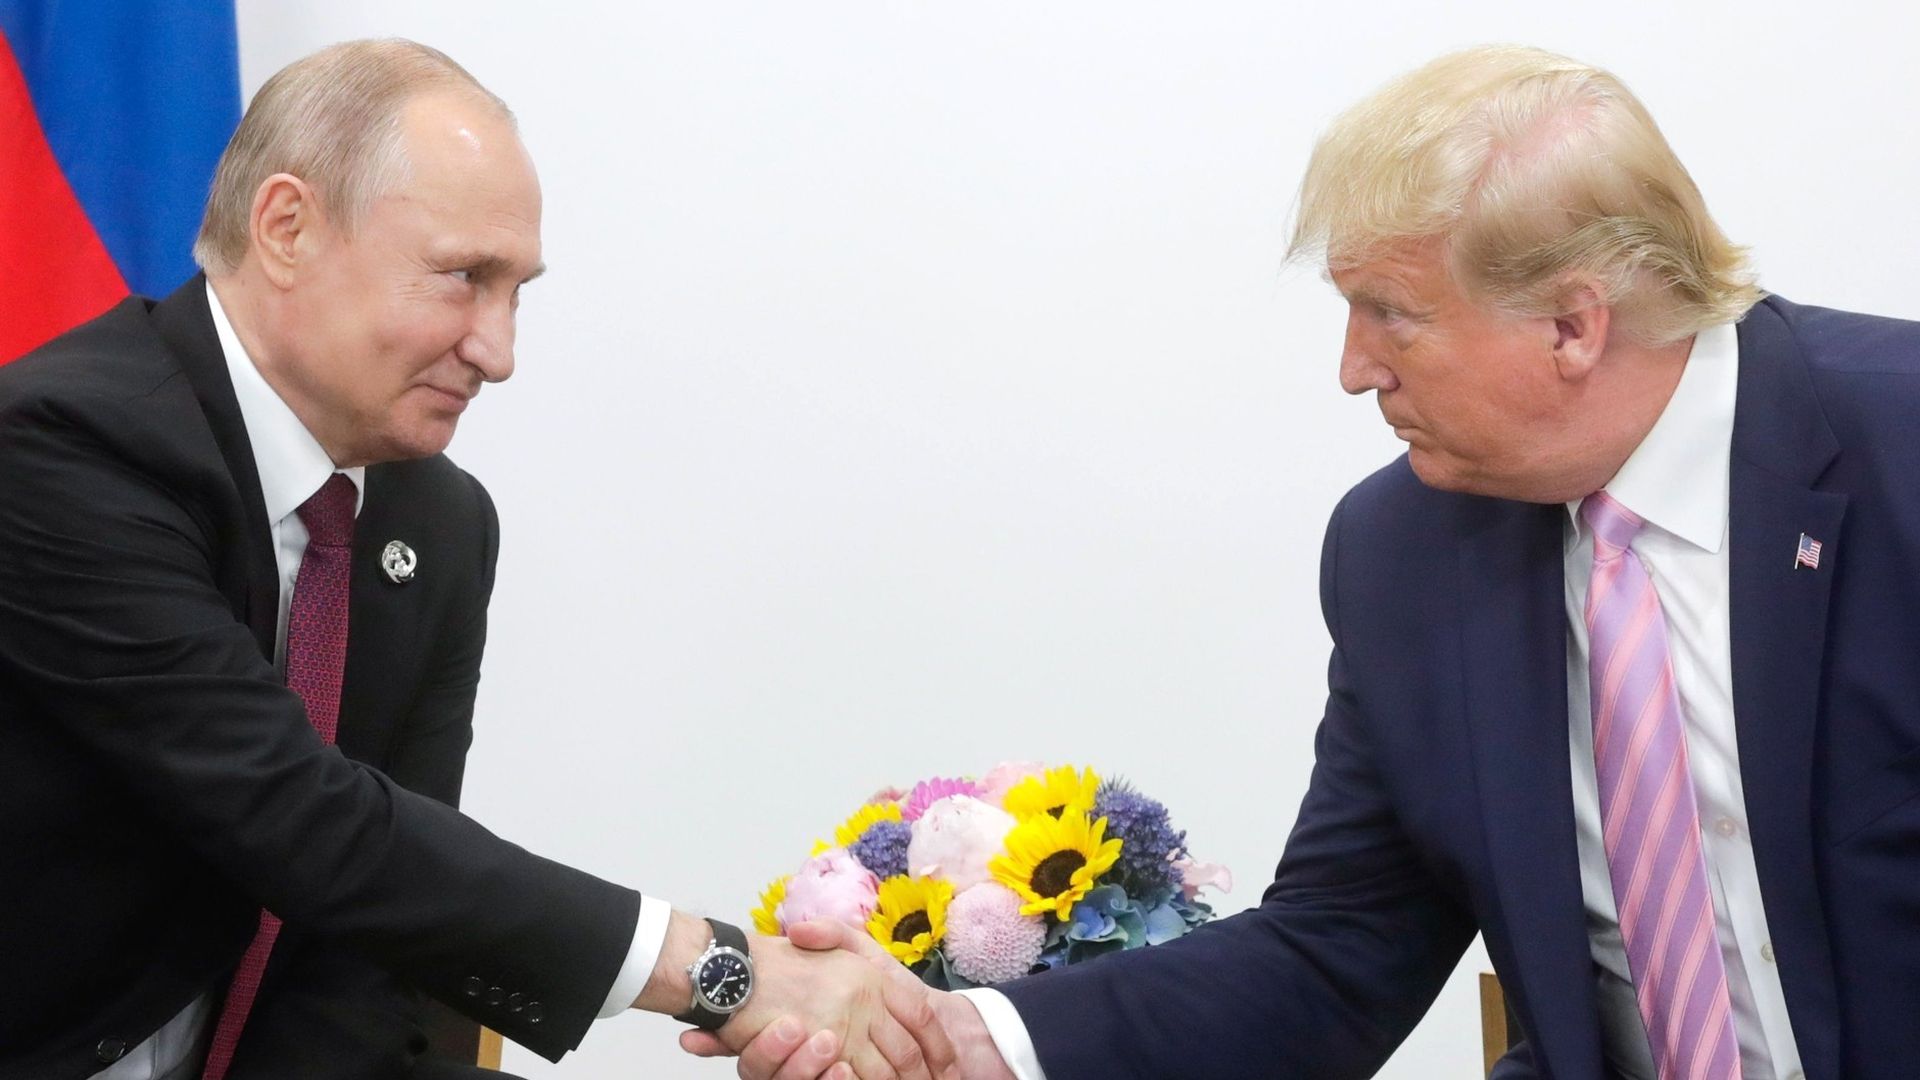 President Donald Trump (R) meets Russian President Vladimir Putin (L) on the first day of the G20 summit in Osaka, Japan on June 28